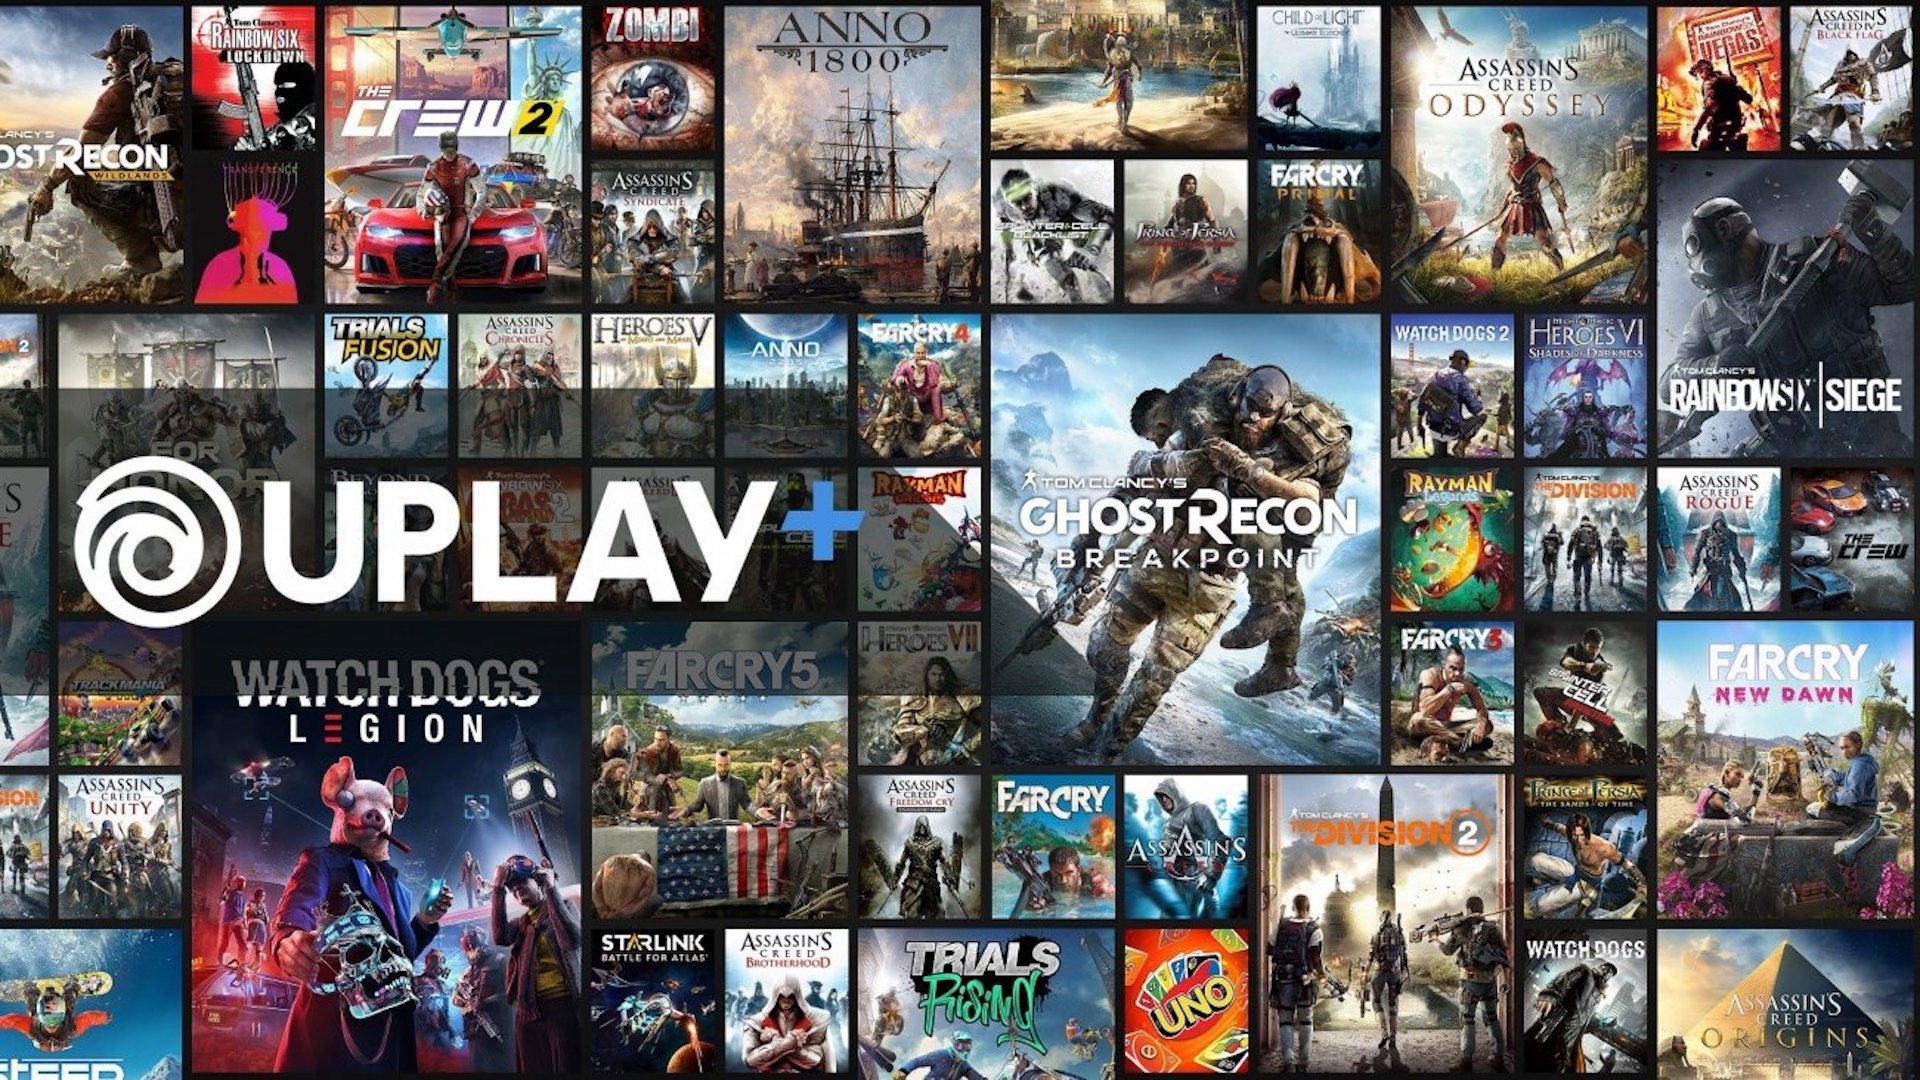 Ubisoft Reveals Game List For Uplay Plus Subscription Service